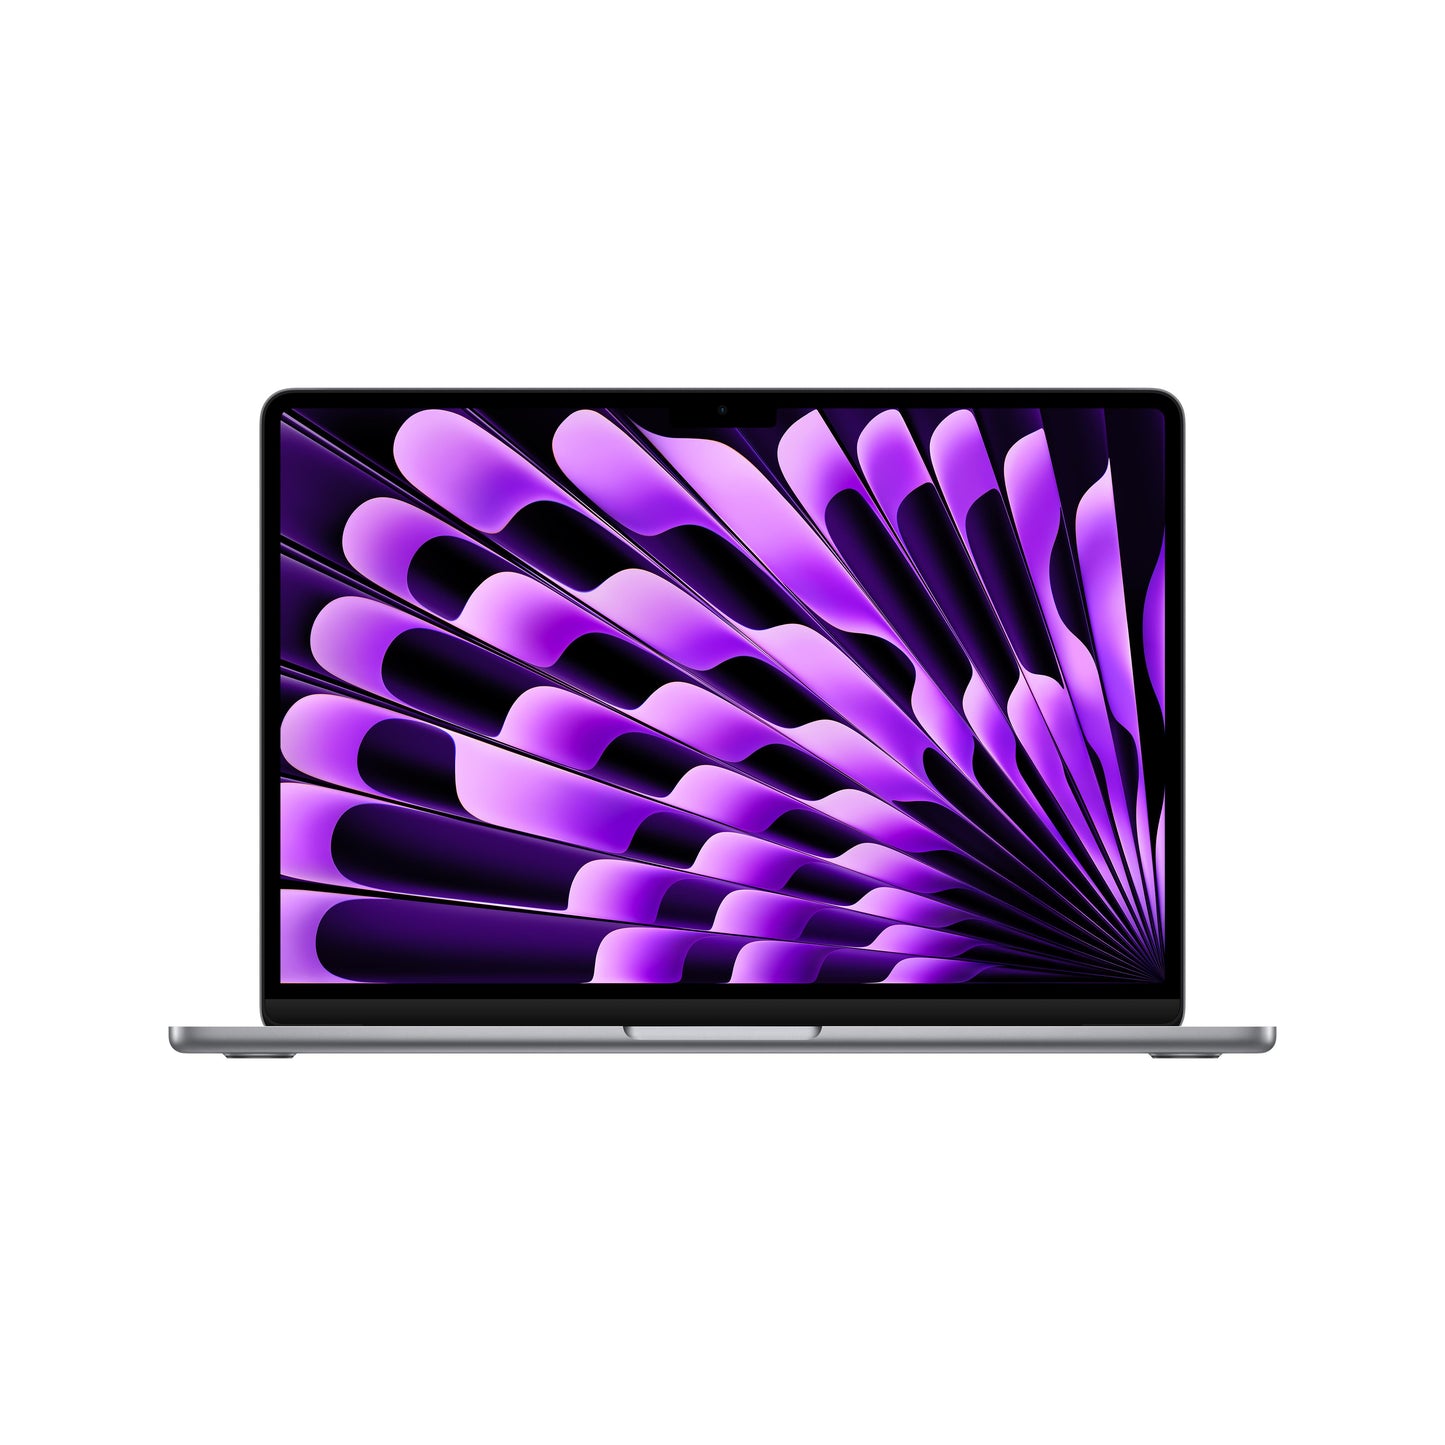 13-inch MacBook Air: Apple M3 chip with 8‑core CPU and 8‑core GPU, 256GB SSD - Space Gray